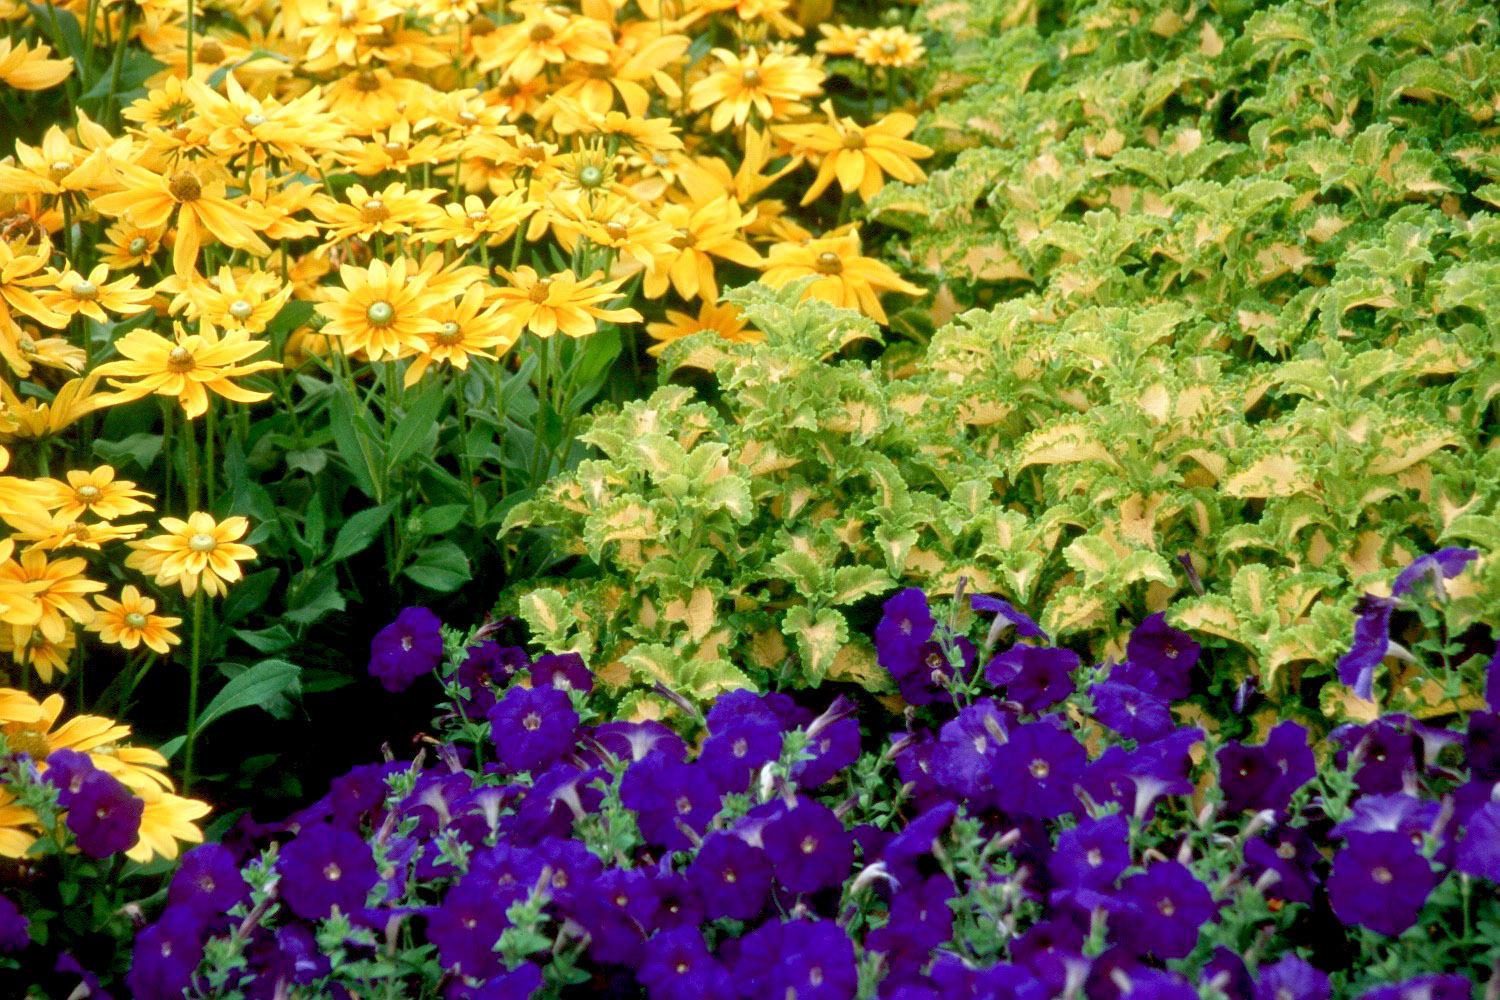 The foliage of Wild Lime coleus matches the yellow in the Prairie Sun rudbeckias and helps provide an opposite complementary color for the Easy Wave Blue petunias. 